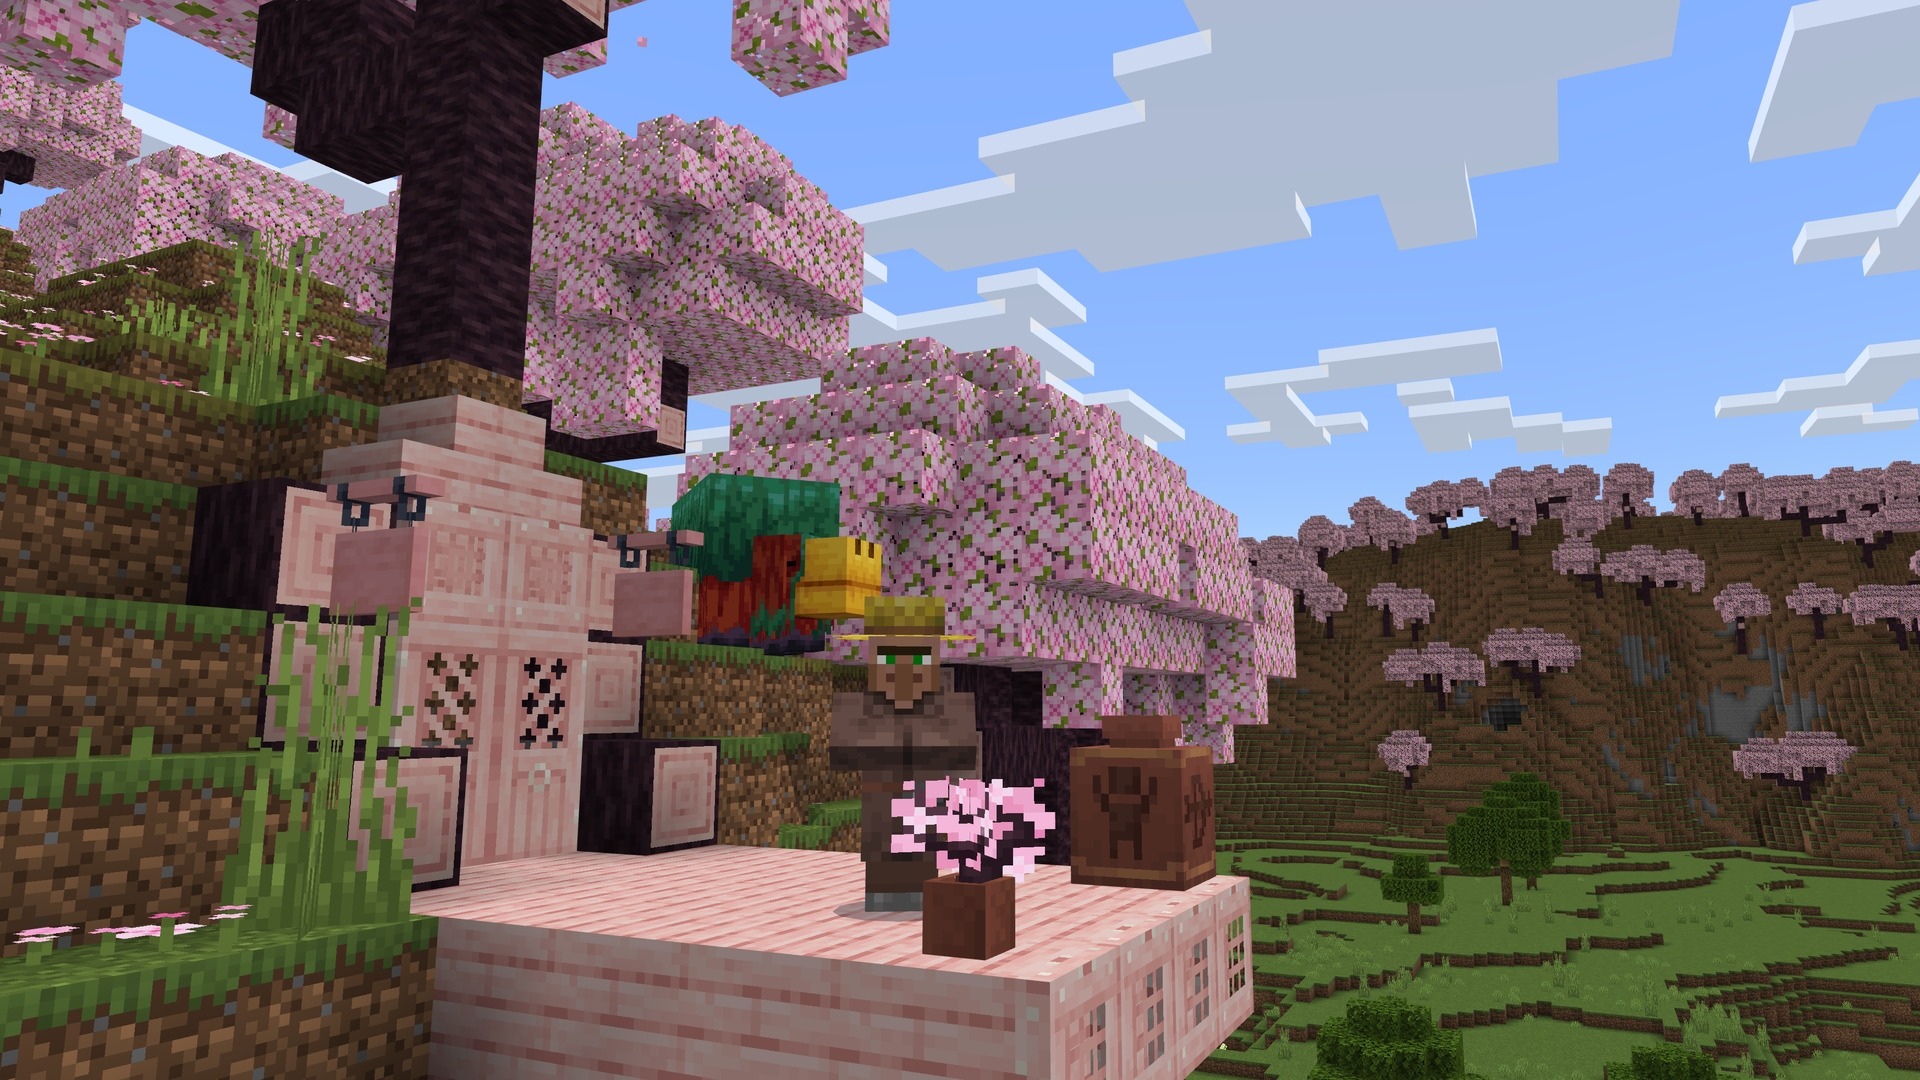 A Minecraft screenshot of a villager standing near some cherry trees and cherry blossom. There is a sniffer in the background, and a decorated pot on the cherry wood planks.